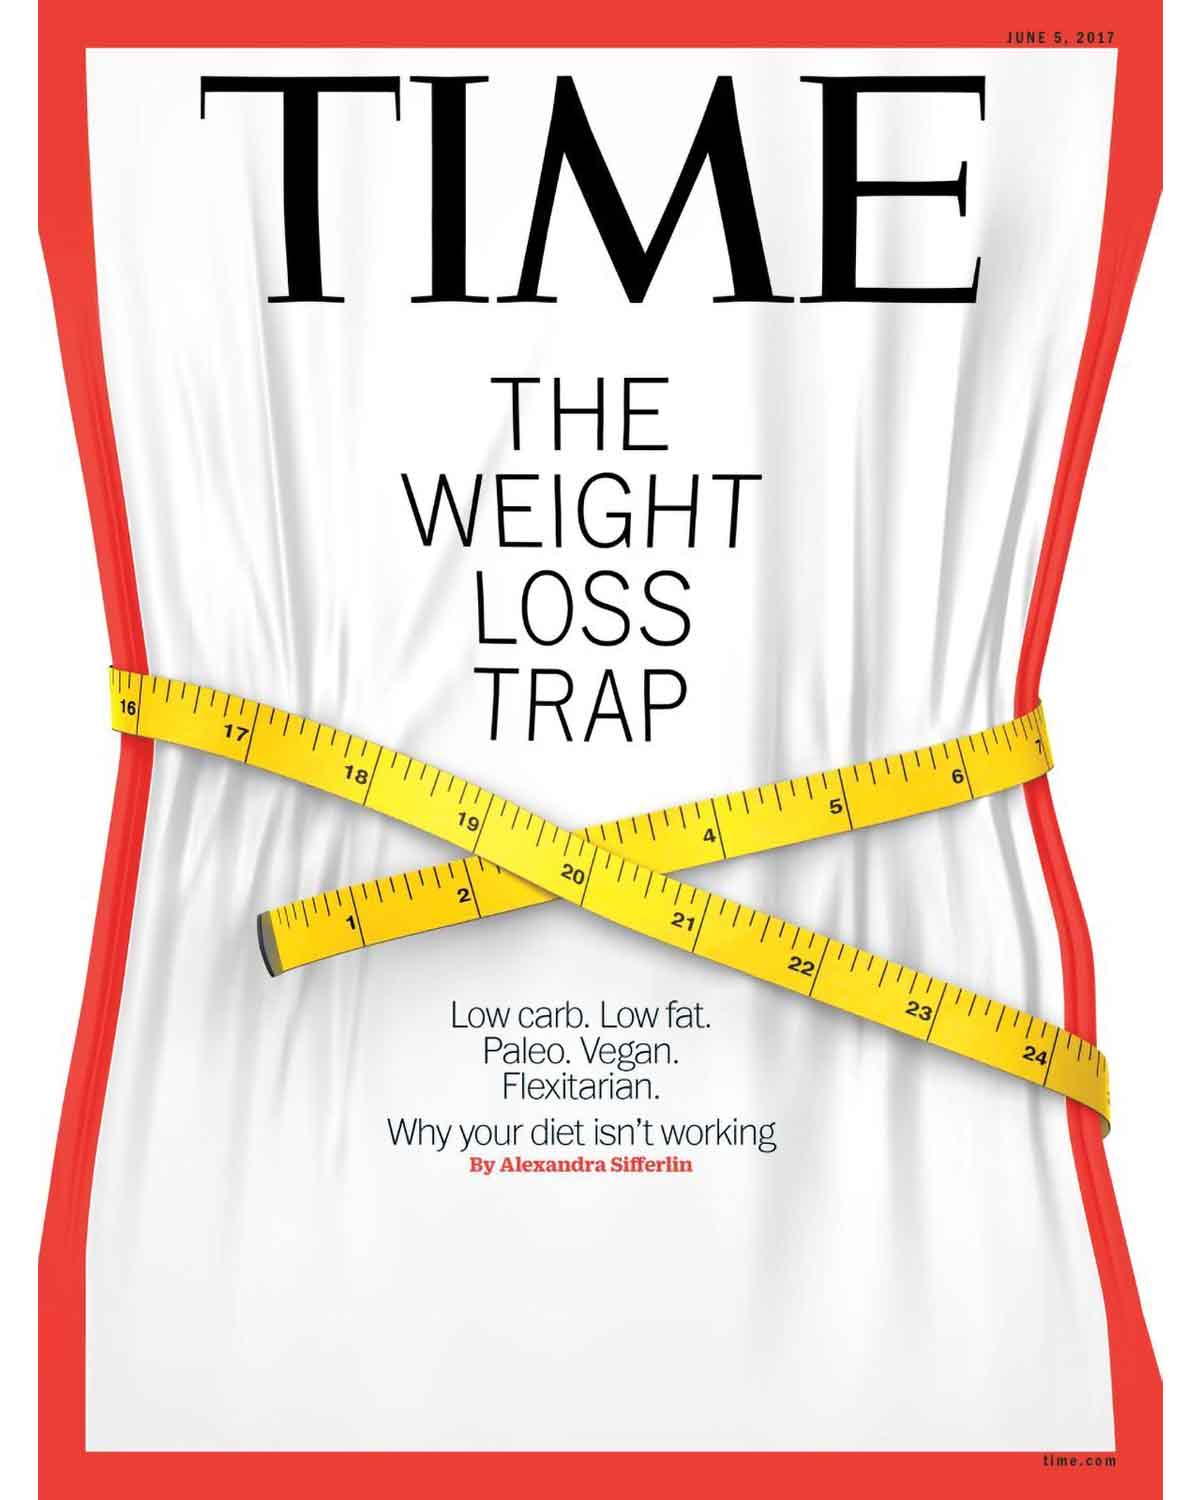 The Time Magazine cover of 'The Weight Loss Trap' for the Gary Taubes interview.